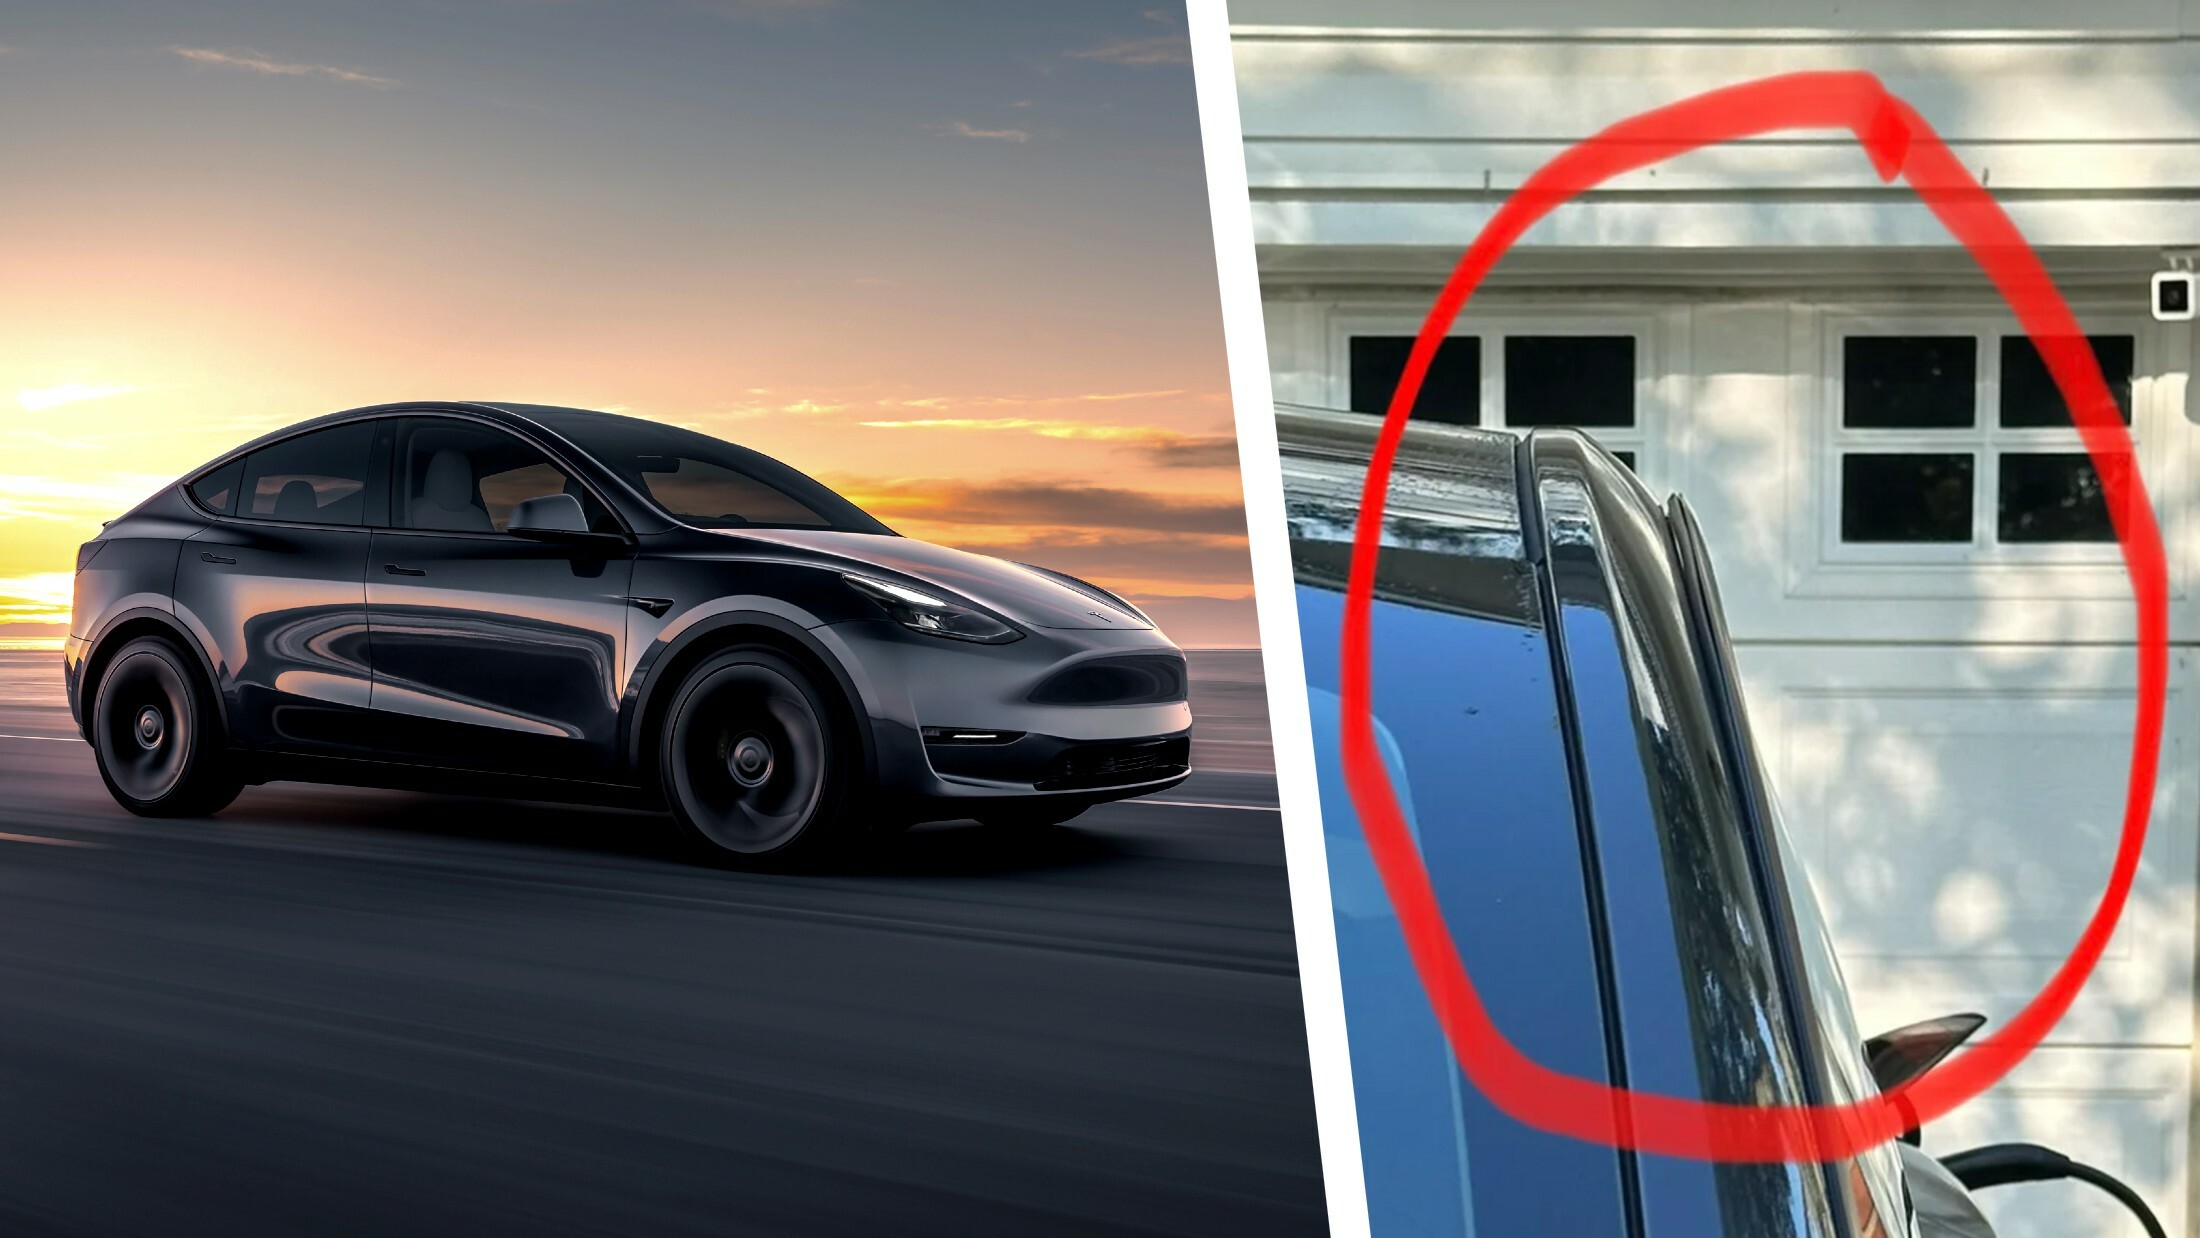 BrandNew Model Y Owner Discovers Tesla’s Quality Control Is Lacking